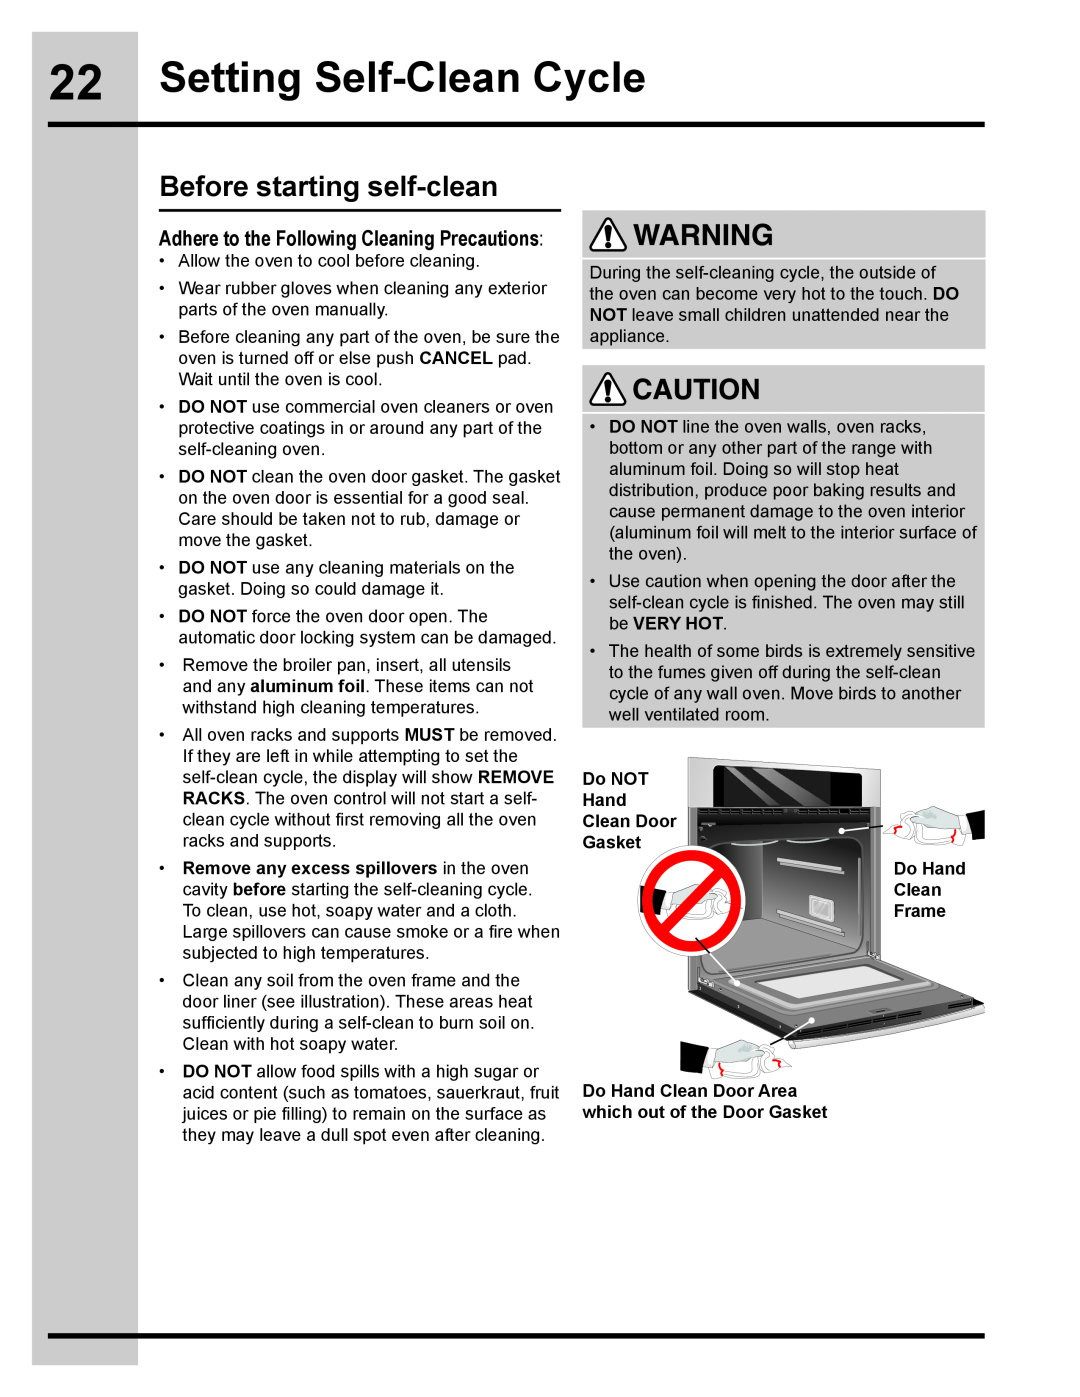 Electrolux 318205134 Setting Self-Clean Cycle, Before starting self-clean, Adhere to the Following Cleaning Precautions 